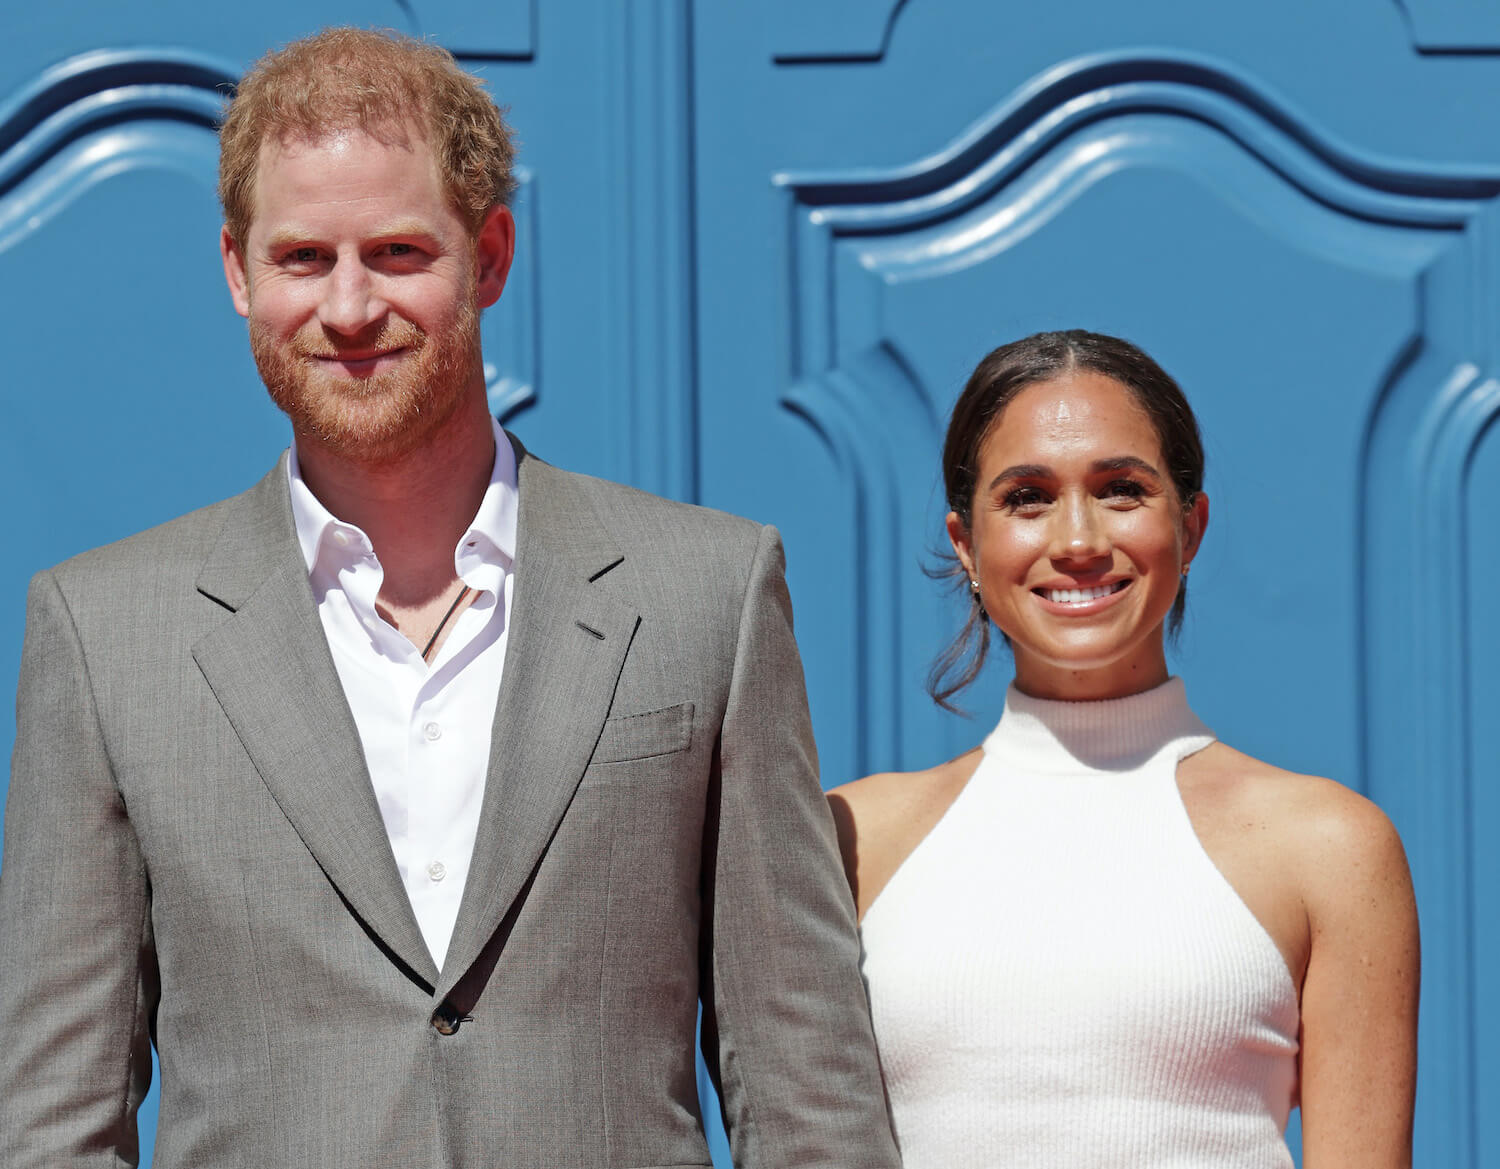 Expert Claims Prince Harry and Meghan Markle’s Attacks on the Royal Family Put Them at Risk of Looking Like Reality Stars